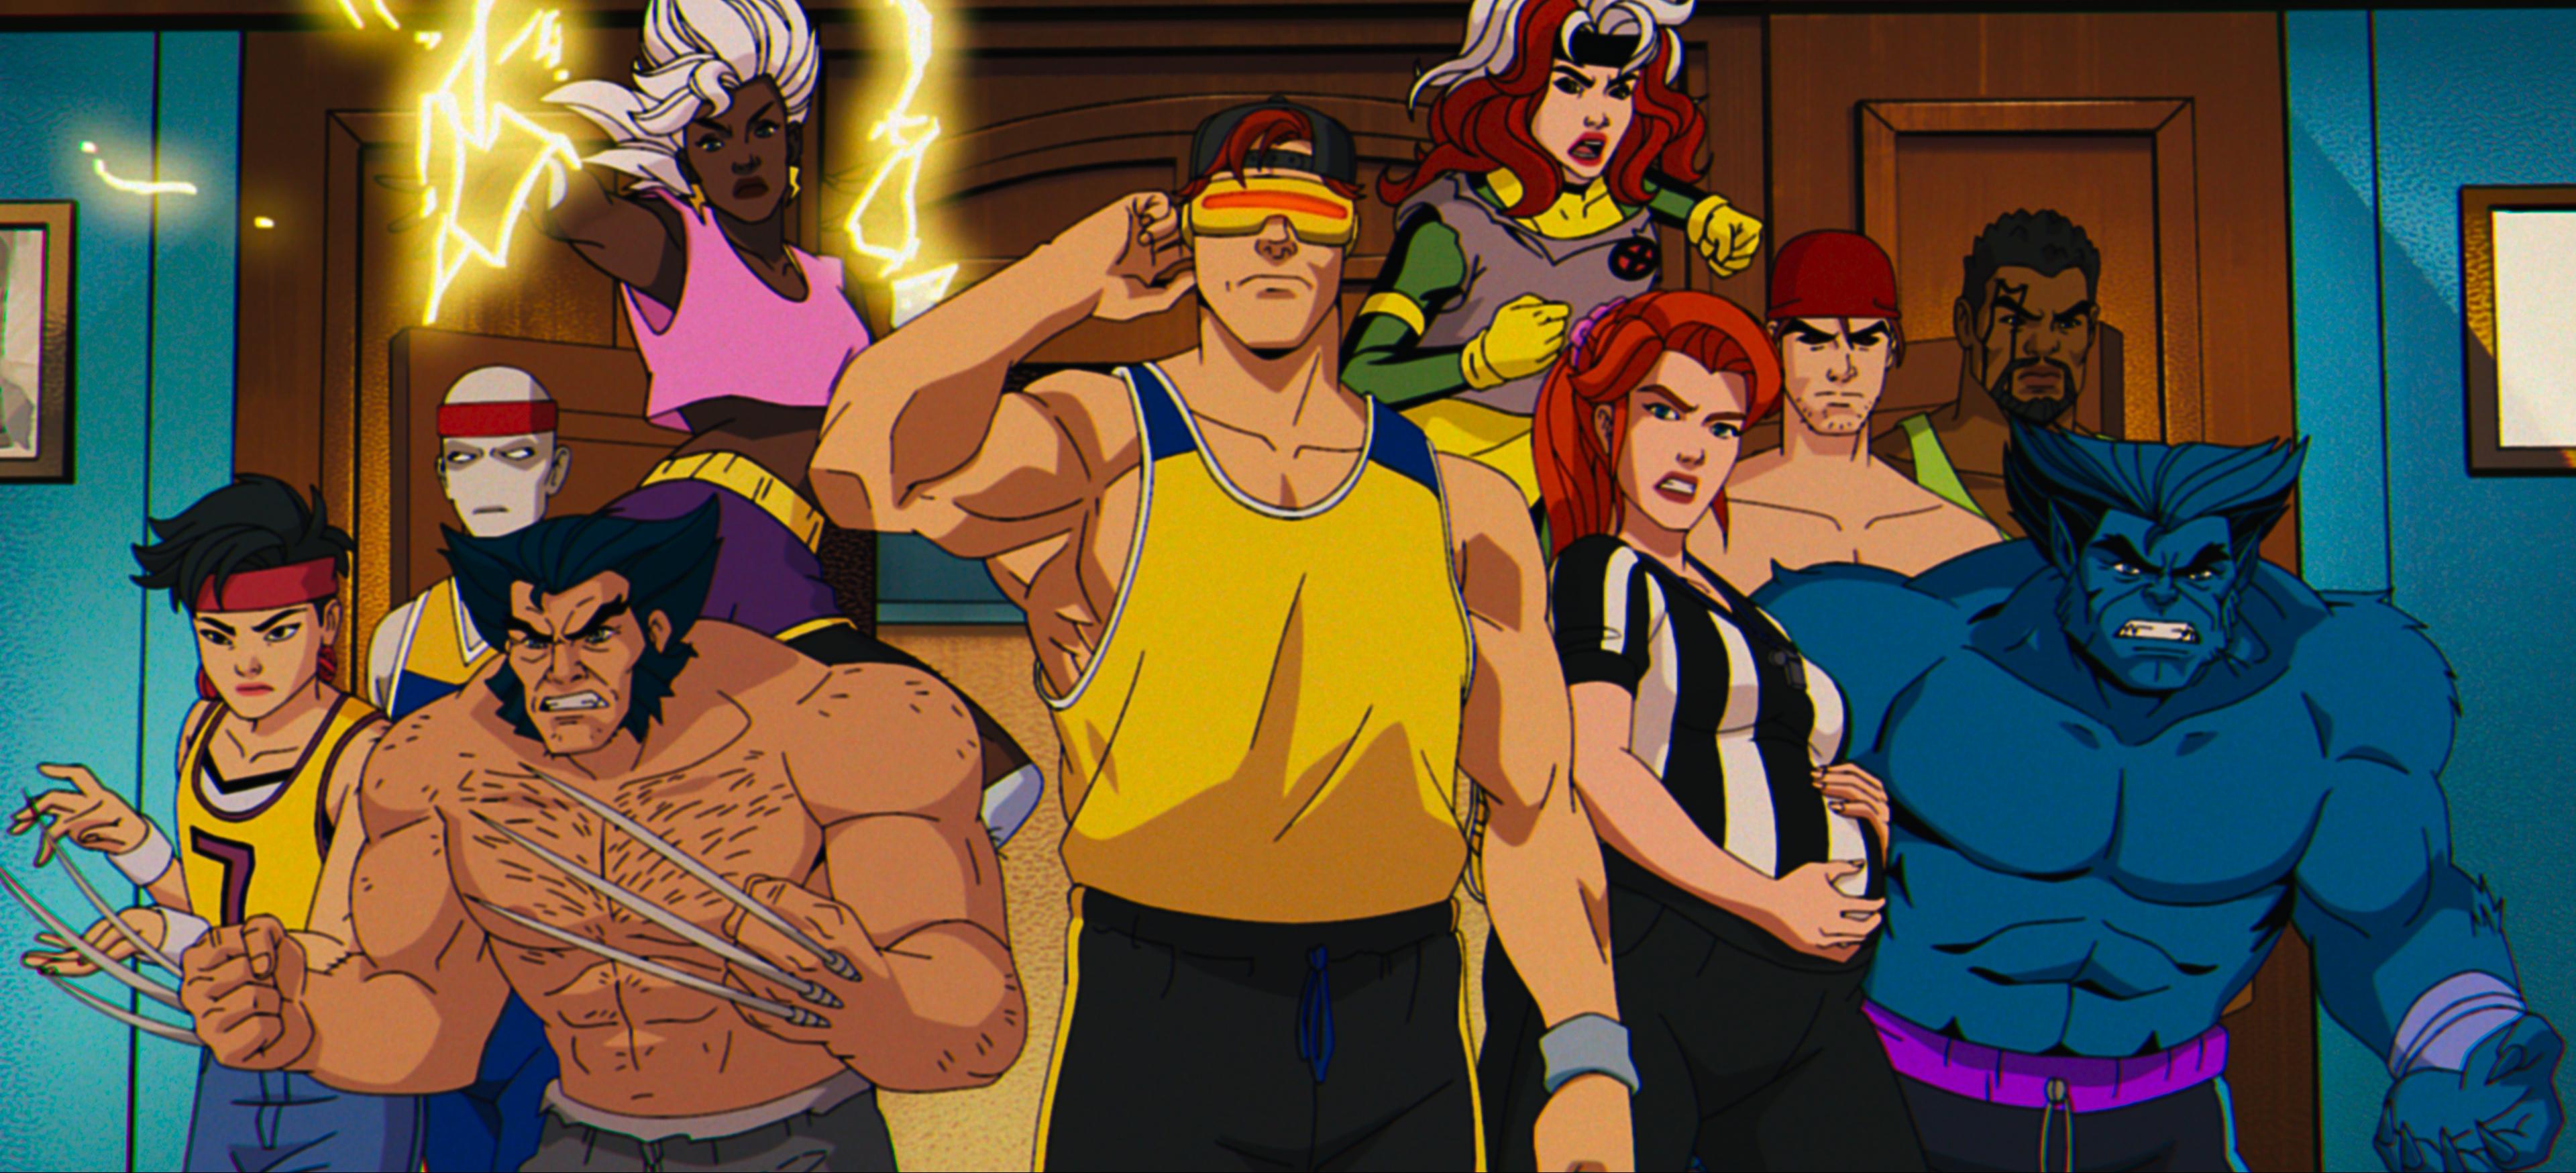 X-Men ’97 - March 20 - Streaming on Disney+X-Men ’97 breathes new life into the iconic saga of the X-Men, picking up where the beloved ’90s show left off. As the X-Men navigate a world without their mentor, Professor X, they face new and dangerous challenges that test their resilience and unity. Amidst a society that continues to distrust and fear mutants, the team must confront their limits as they fight to protect a world on the brink of chaos.